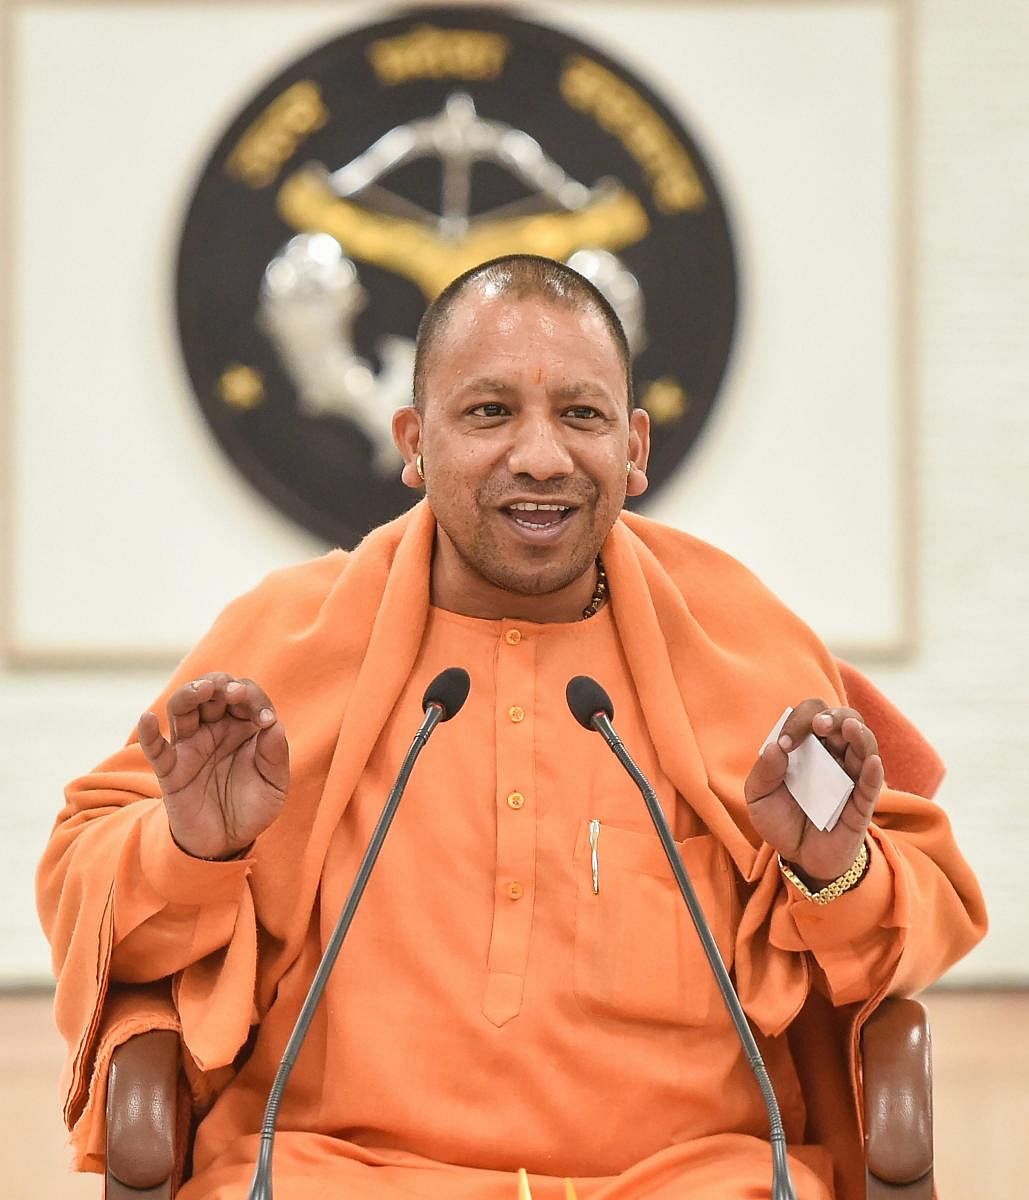 Uttar Pradesh Chief Minister Yogi Adityanath addresses a press conference at his residence in Lucknow on Dec. 14, 2018. PTI